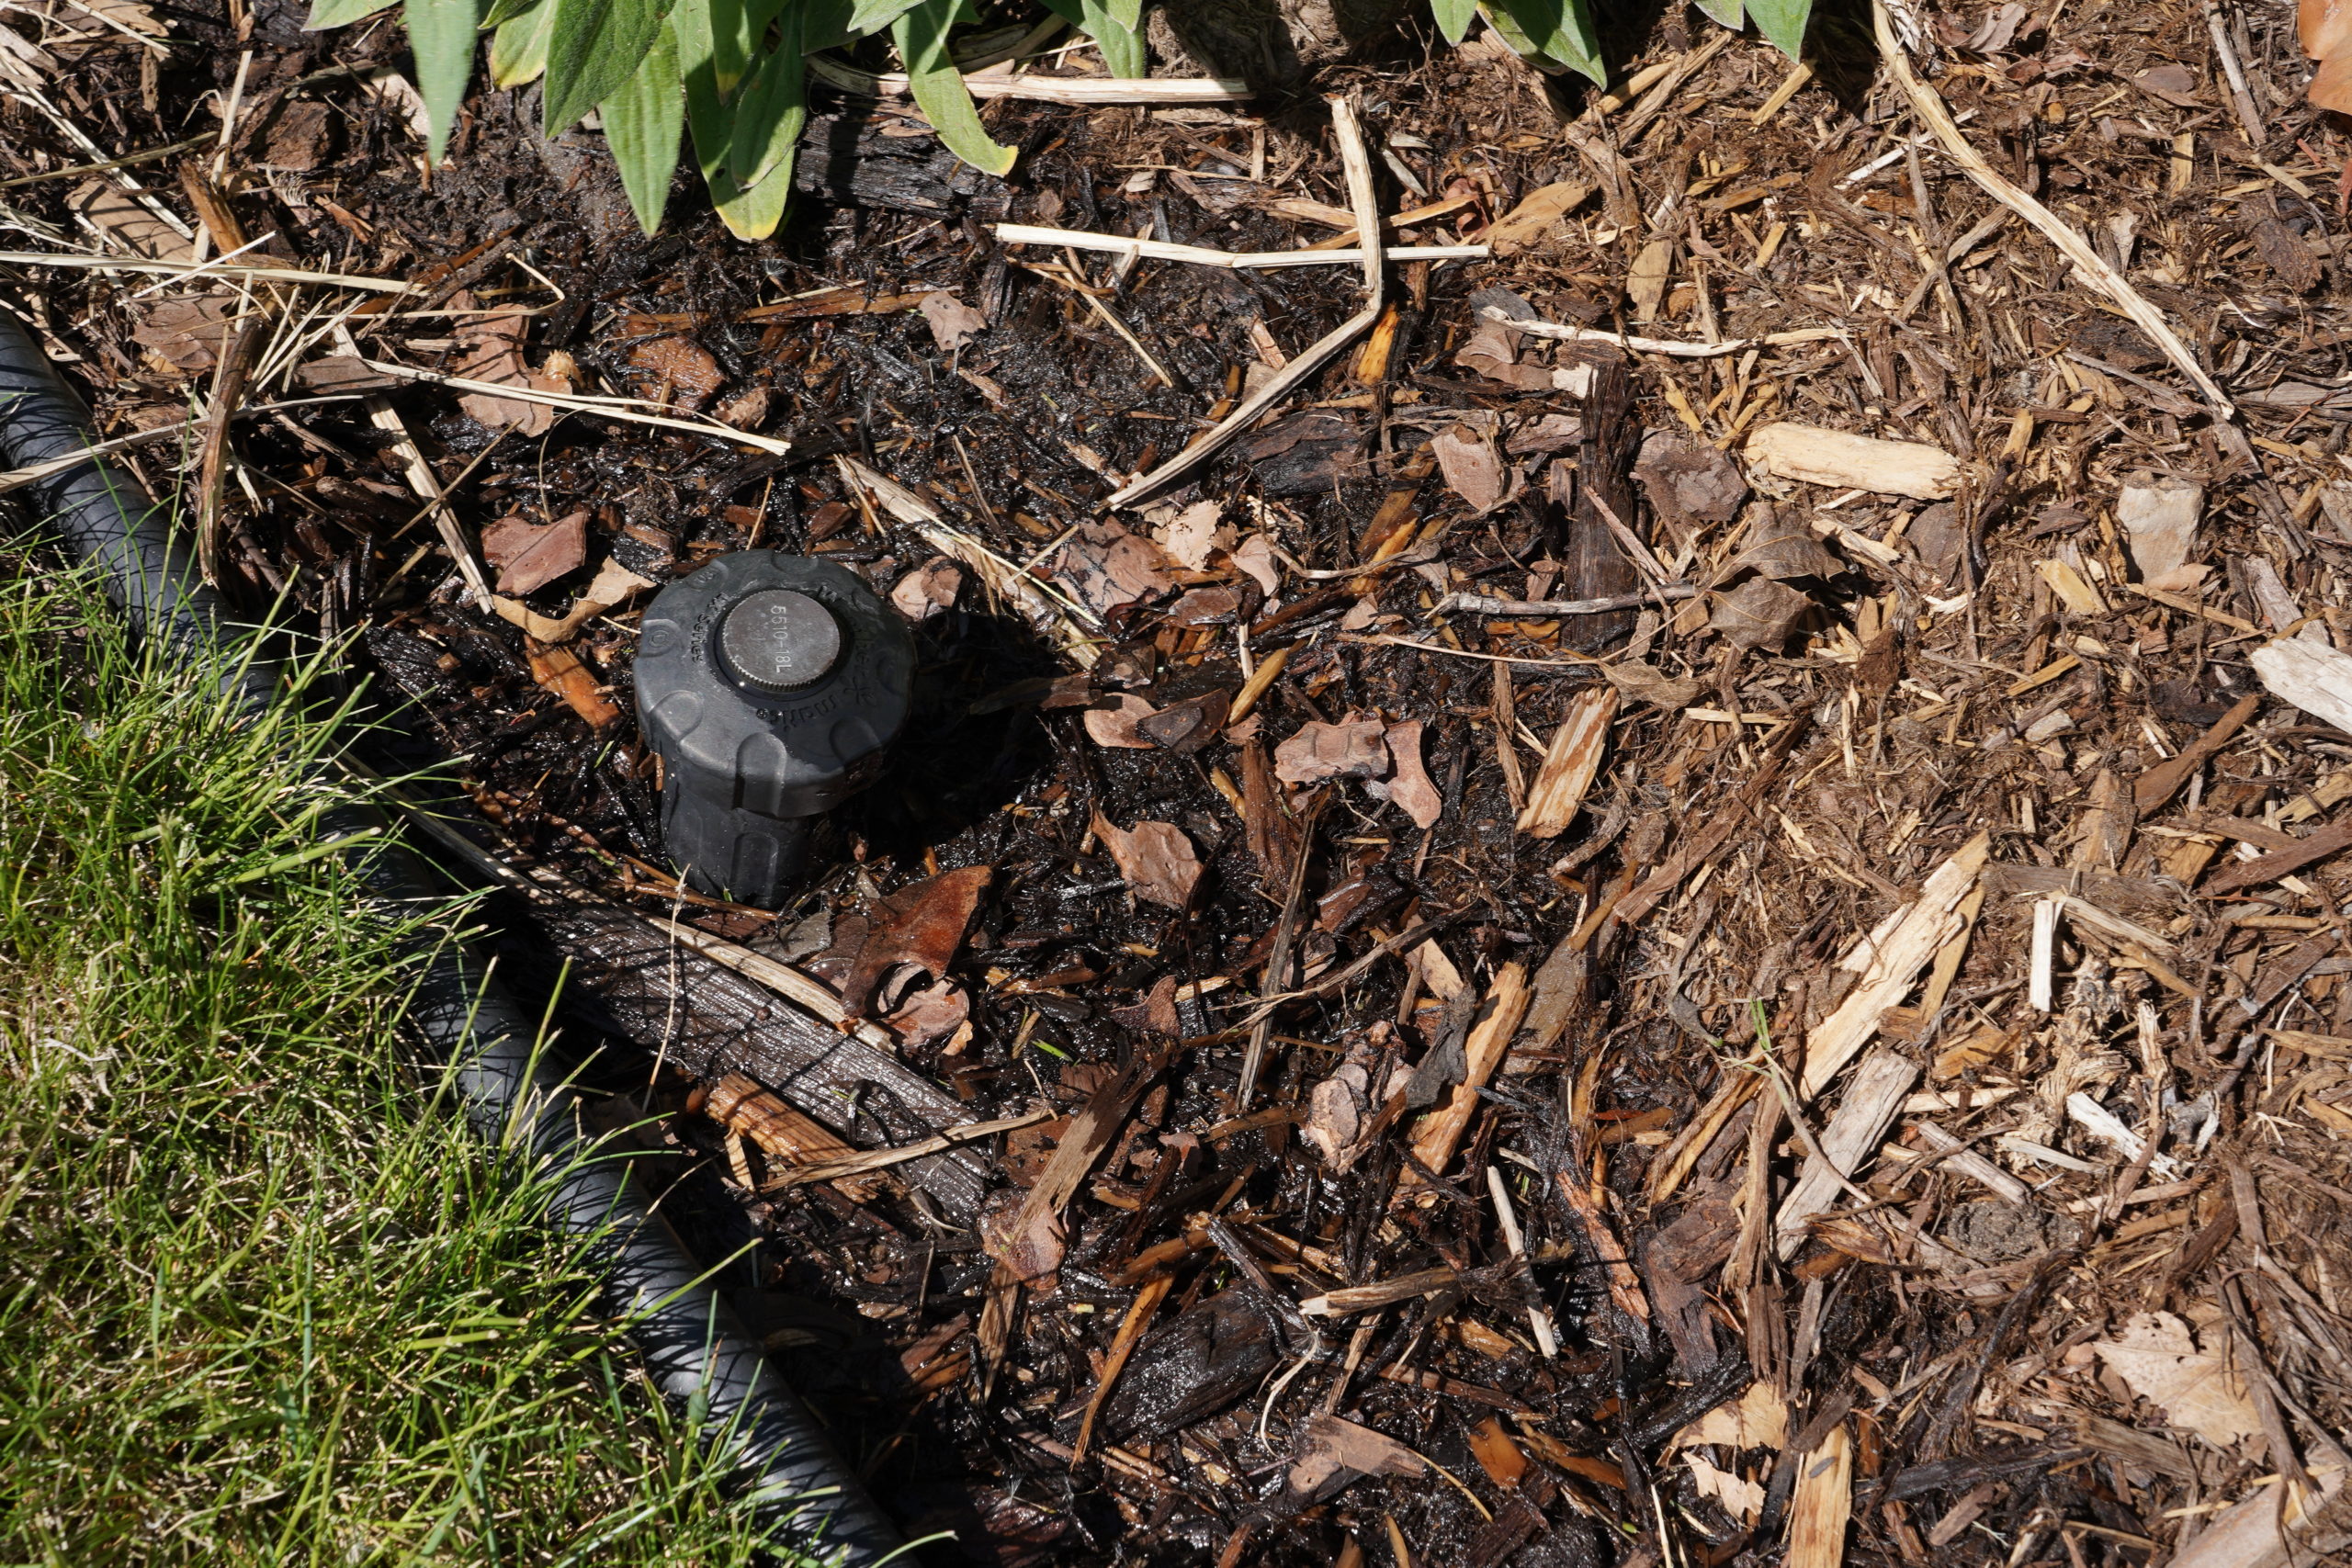 Wet areas around sprinklers can be a sign of a leak in a supply line or connection underground. Photo credit: Denver Water.